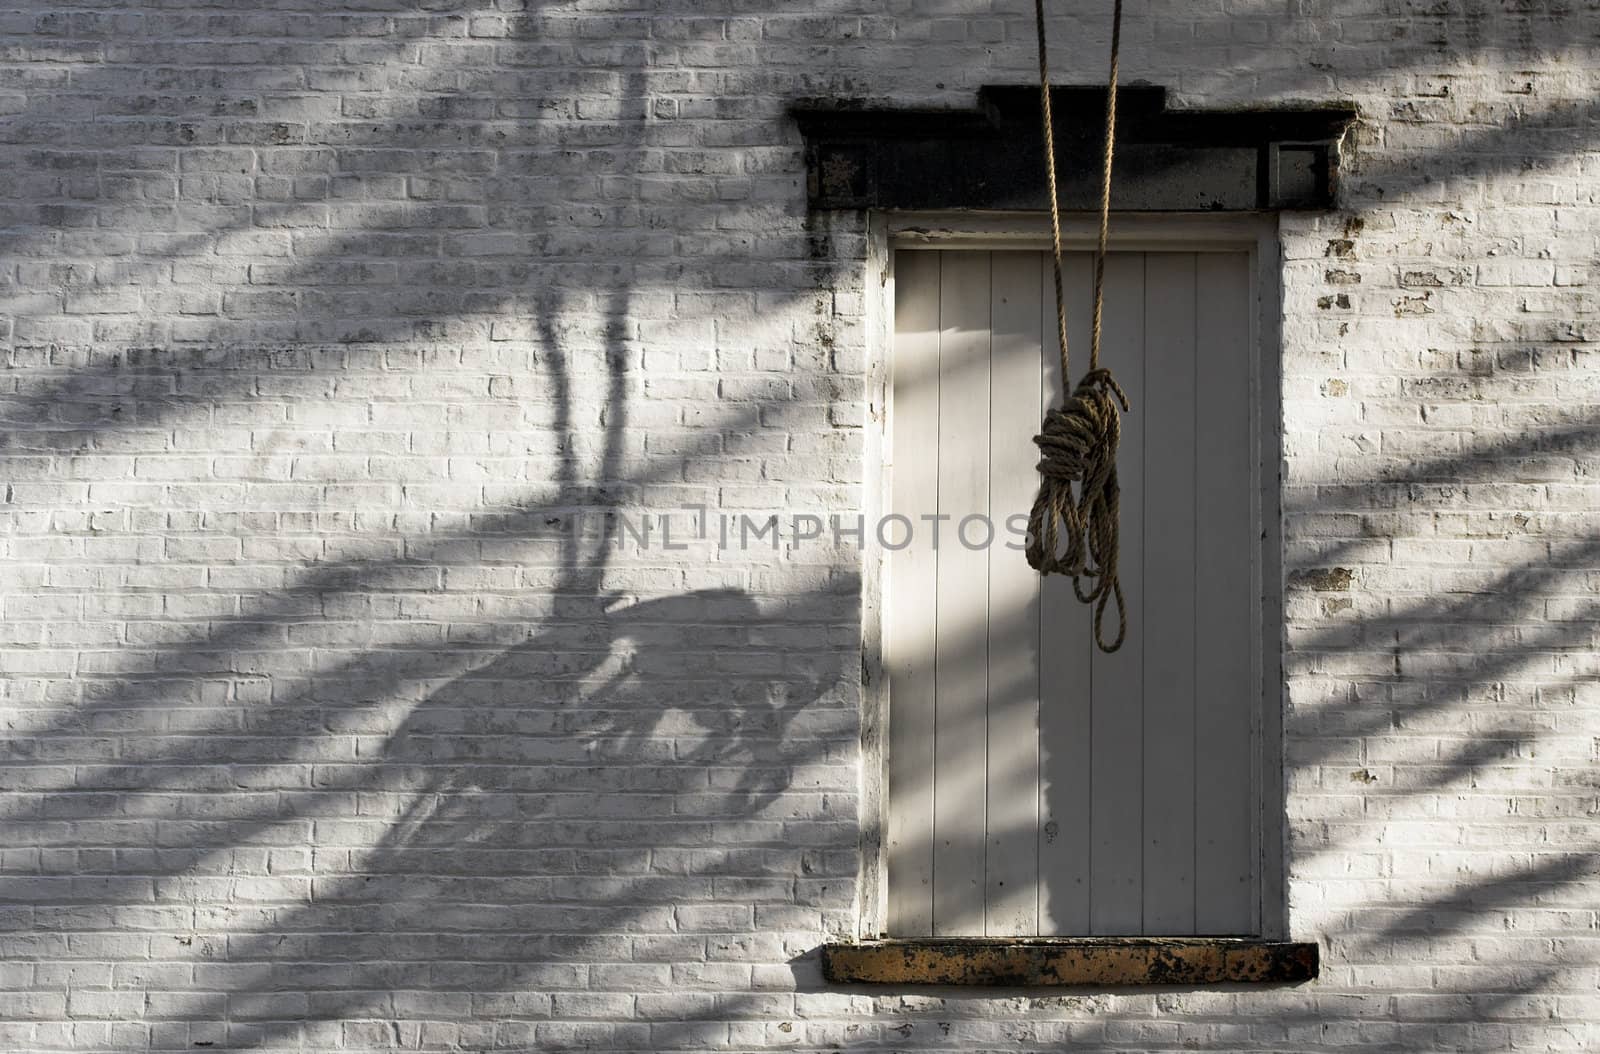 An old building from a ghost town with a rope hanging from the top of the building. Evening side lighting causes the dramatic shadows.